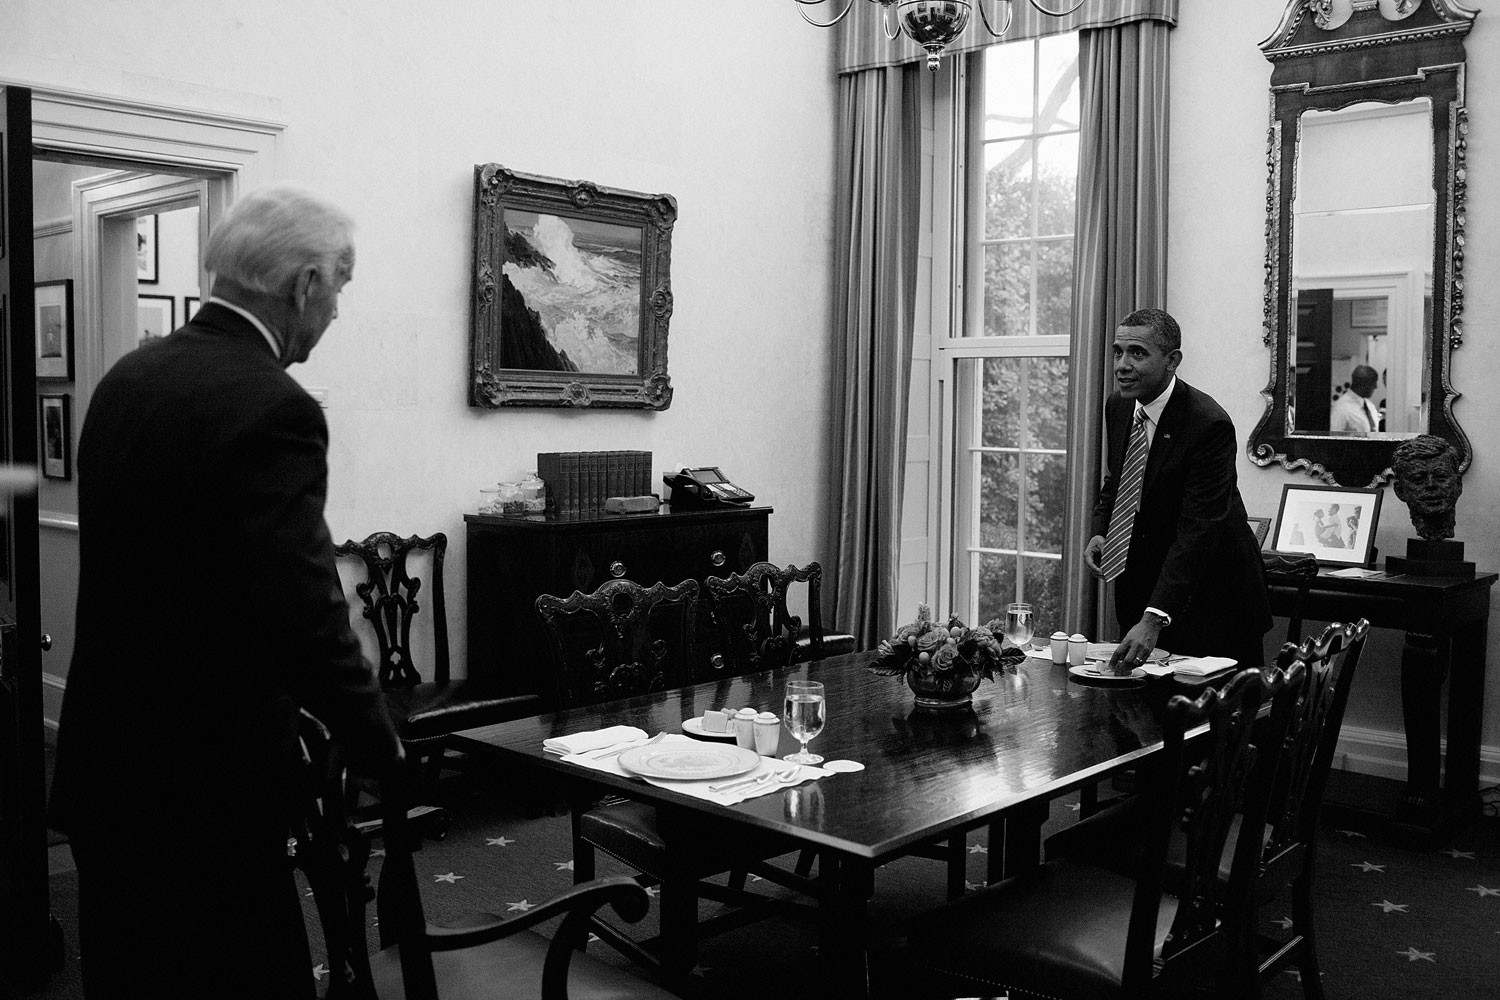 January 17, 2012. President Barack Obama sits down to lunch with Vice President Joe Biden in the Oval dining room.